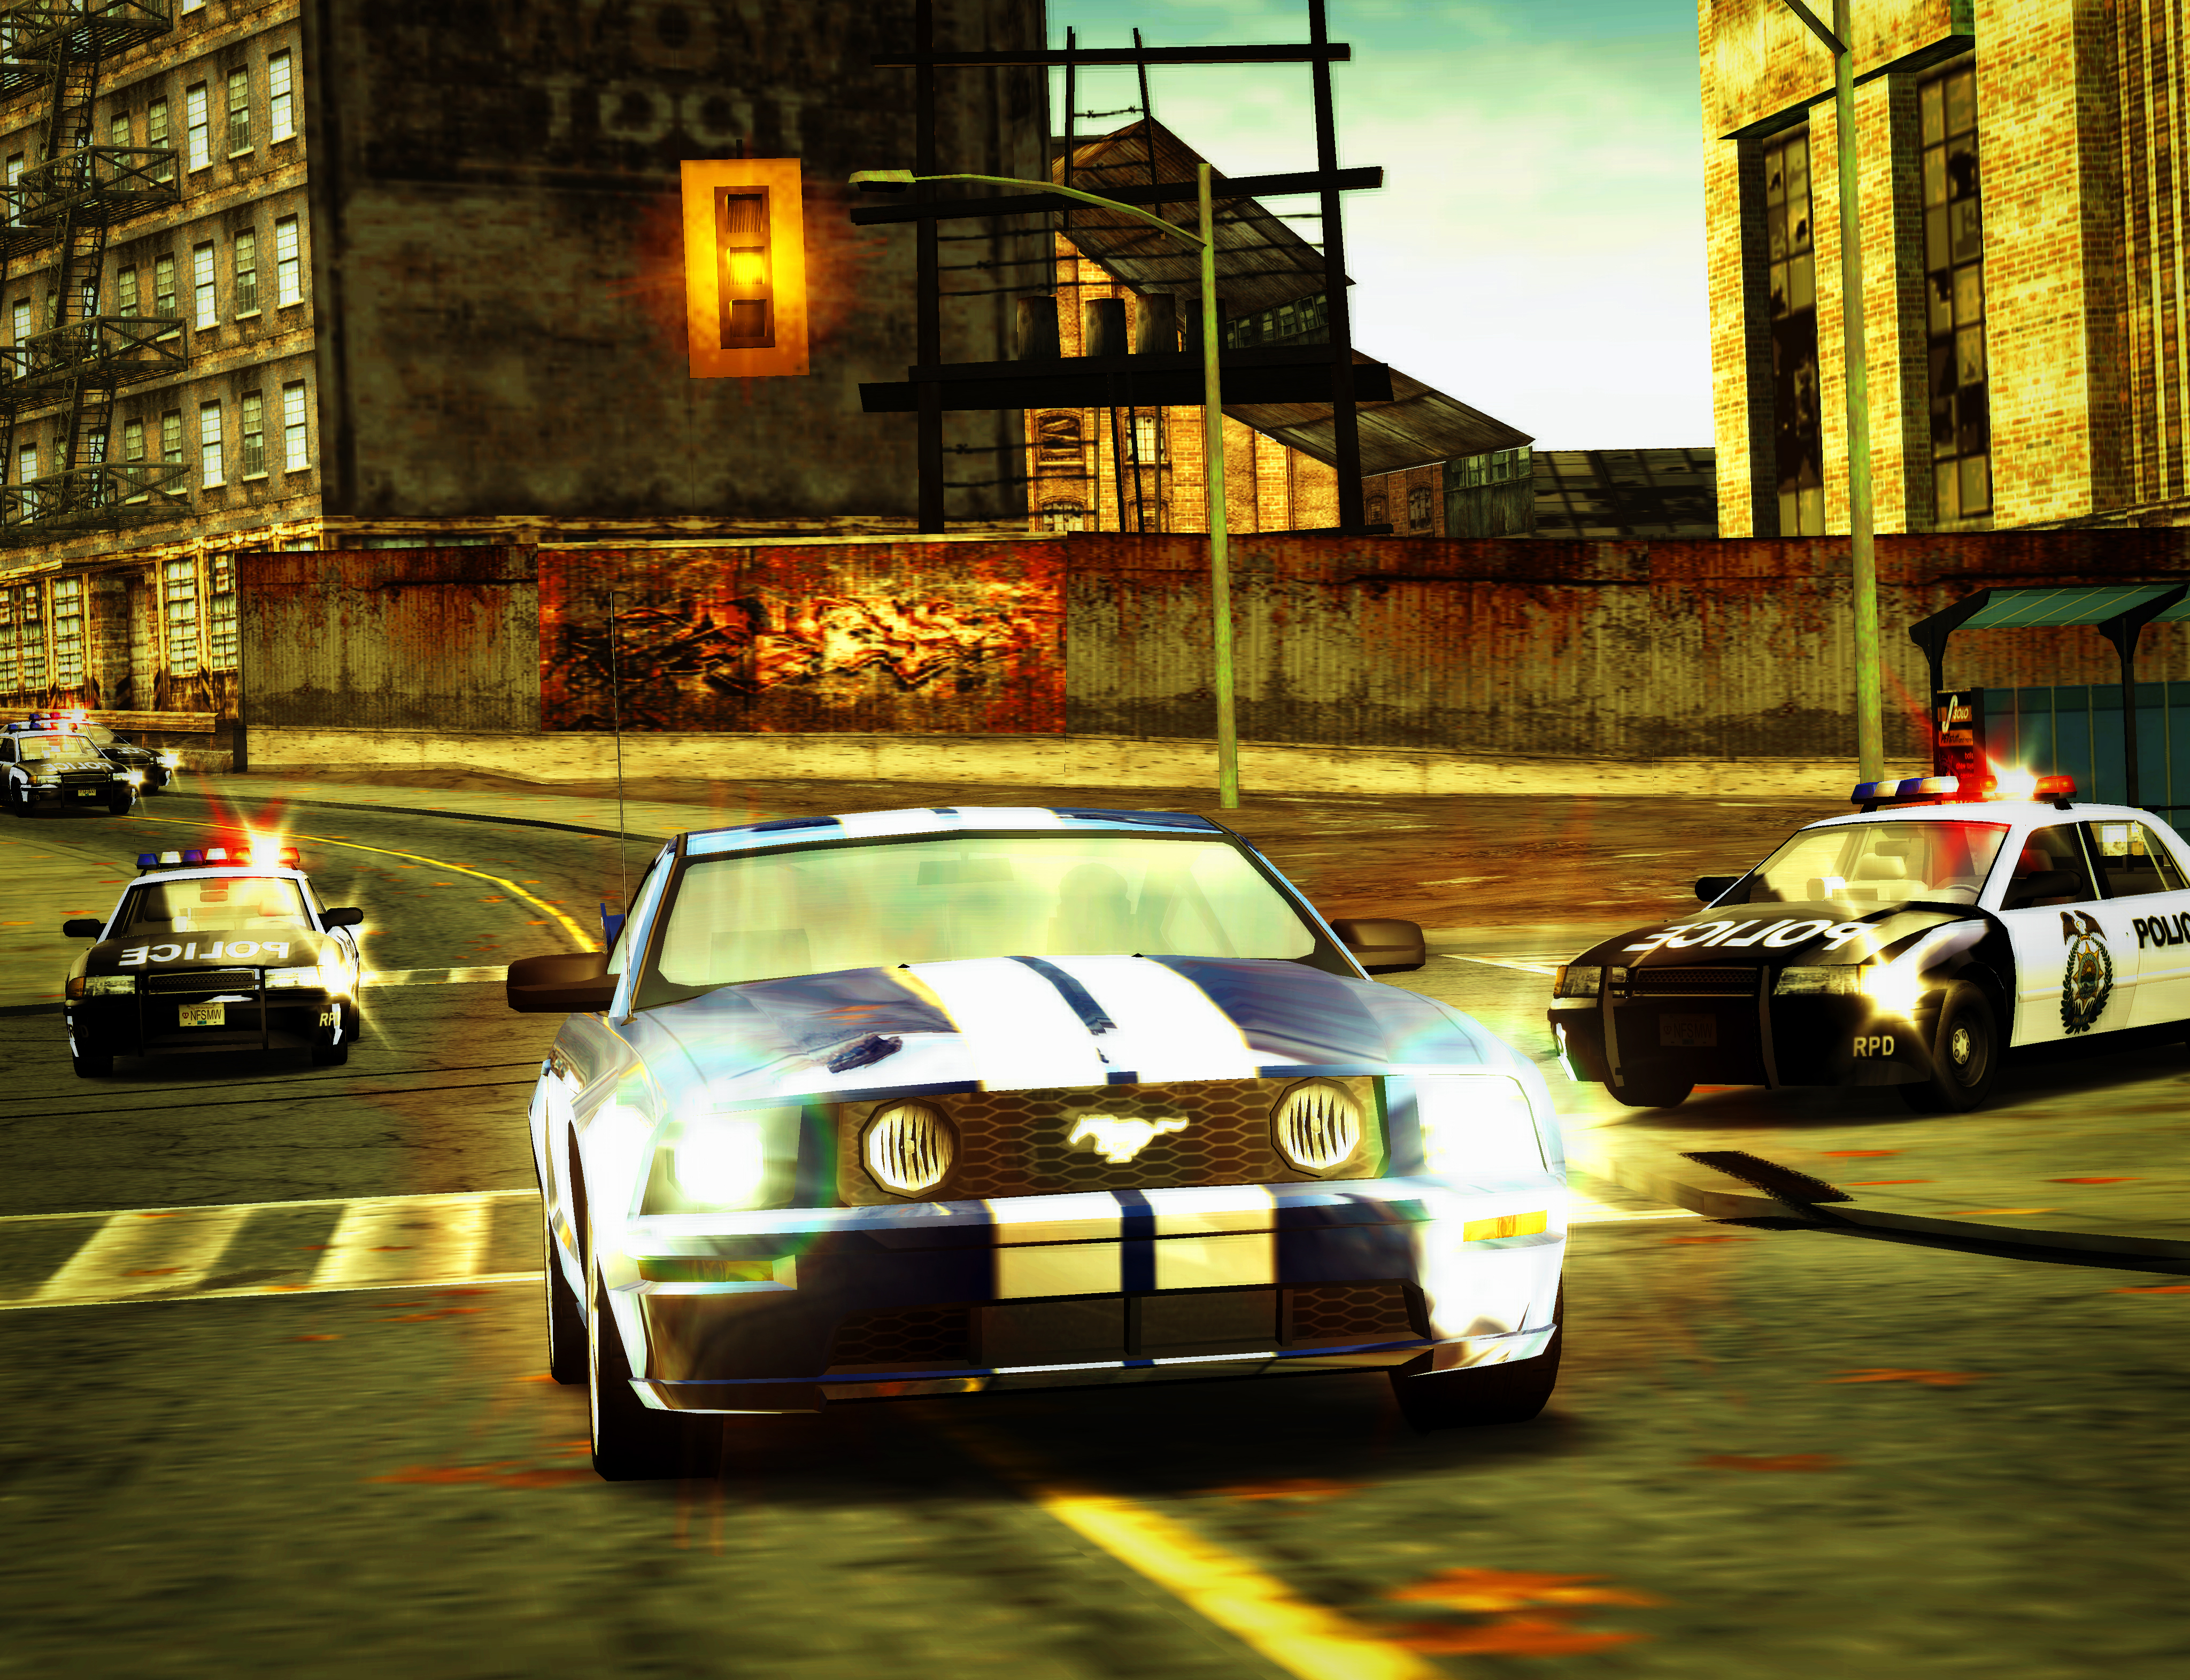 Nfs игра гонки. Need for Speed most wanted 2005. Нфс МВ 2005. Гонки NFS most wanted. Гонки NFS most wanted 2005.